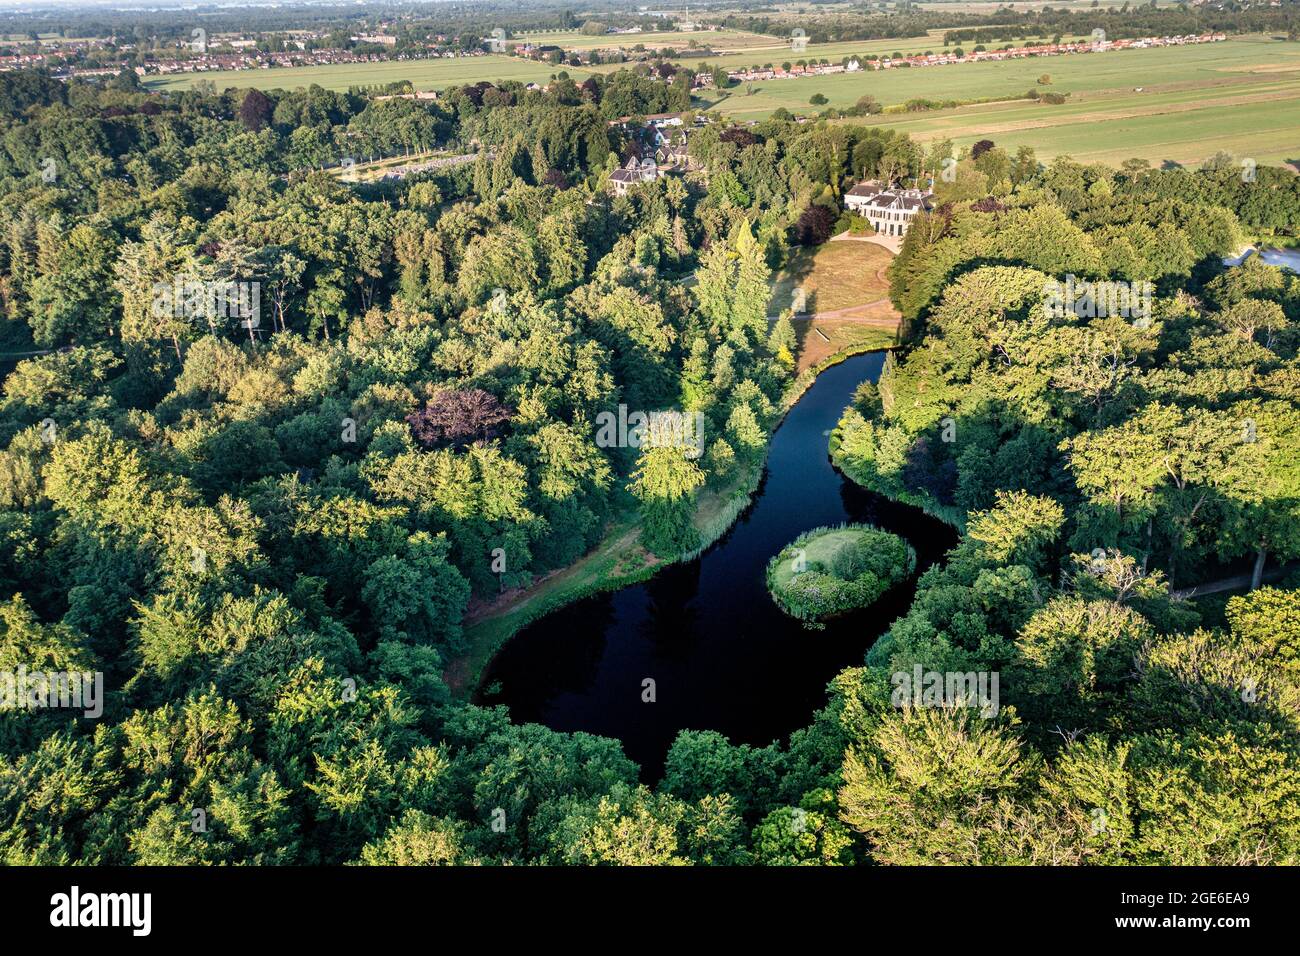 The Netherlands, Õs-Graveland, Rural estate Schaep en Burgh. Country house with lawn. Former Headquarters of Natuurmonumenten. Aerial. Stock Photo